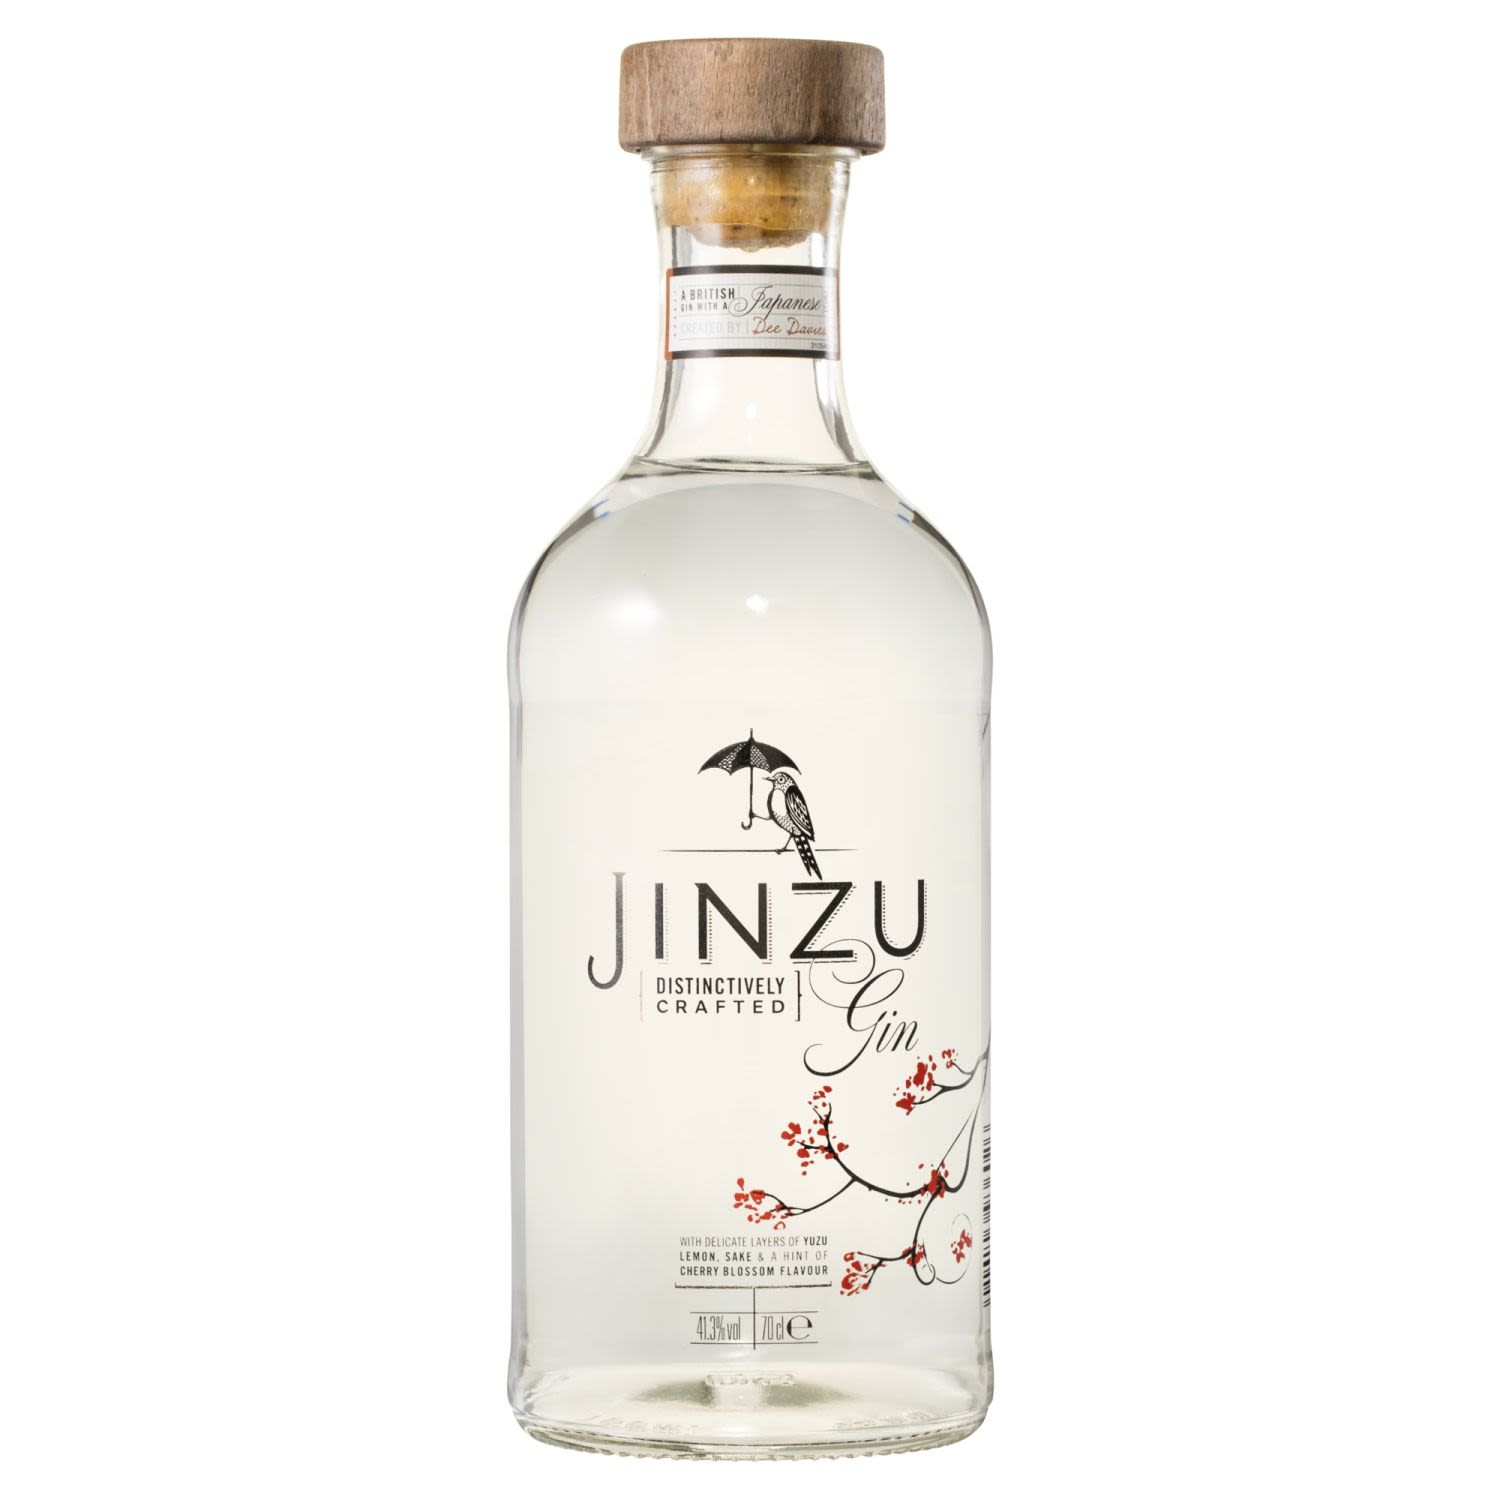 Fresh juniper taste invigorated with zesty citrus and delicate hints of cherry blossom flavour, finished with smooth sake-like notes.<br /> <br />Alcohol Volume: 41.30%<br /><br />Pack Format: Bottle<br /><br />Standard Drinks: 23</br /><br />Pack Type: Bottle<br /><br />Country of Origin: United Kingdom<br />